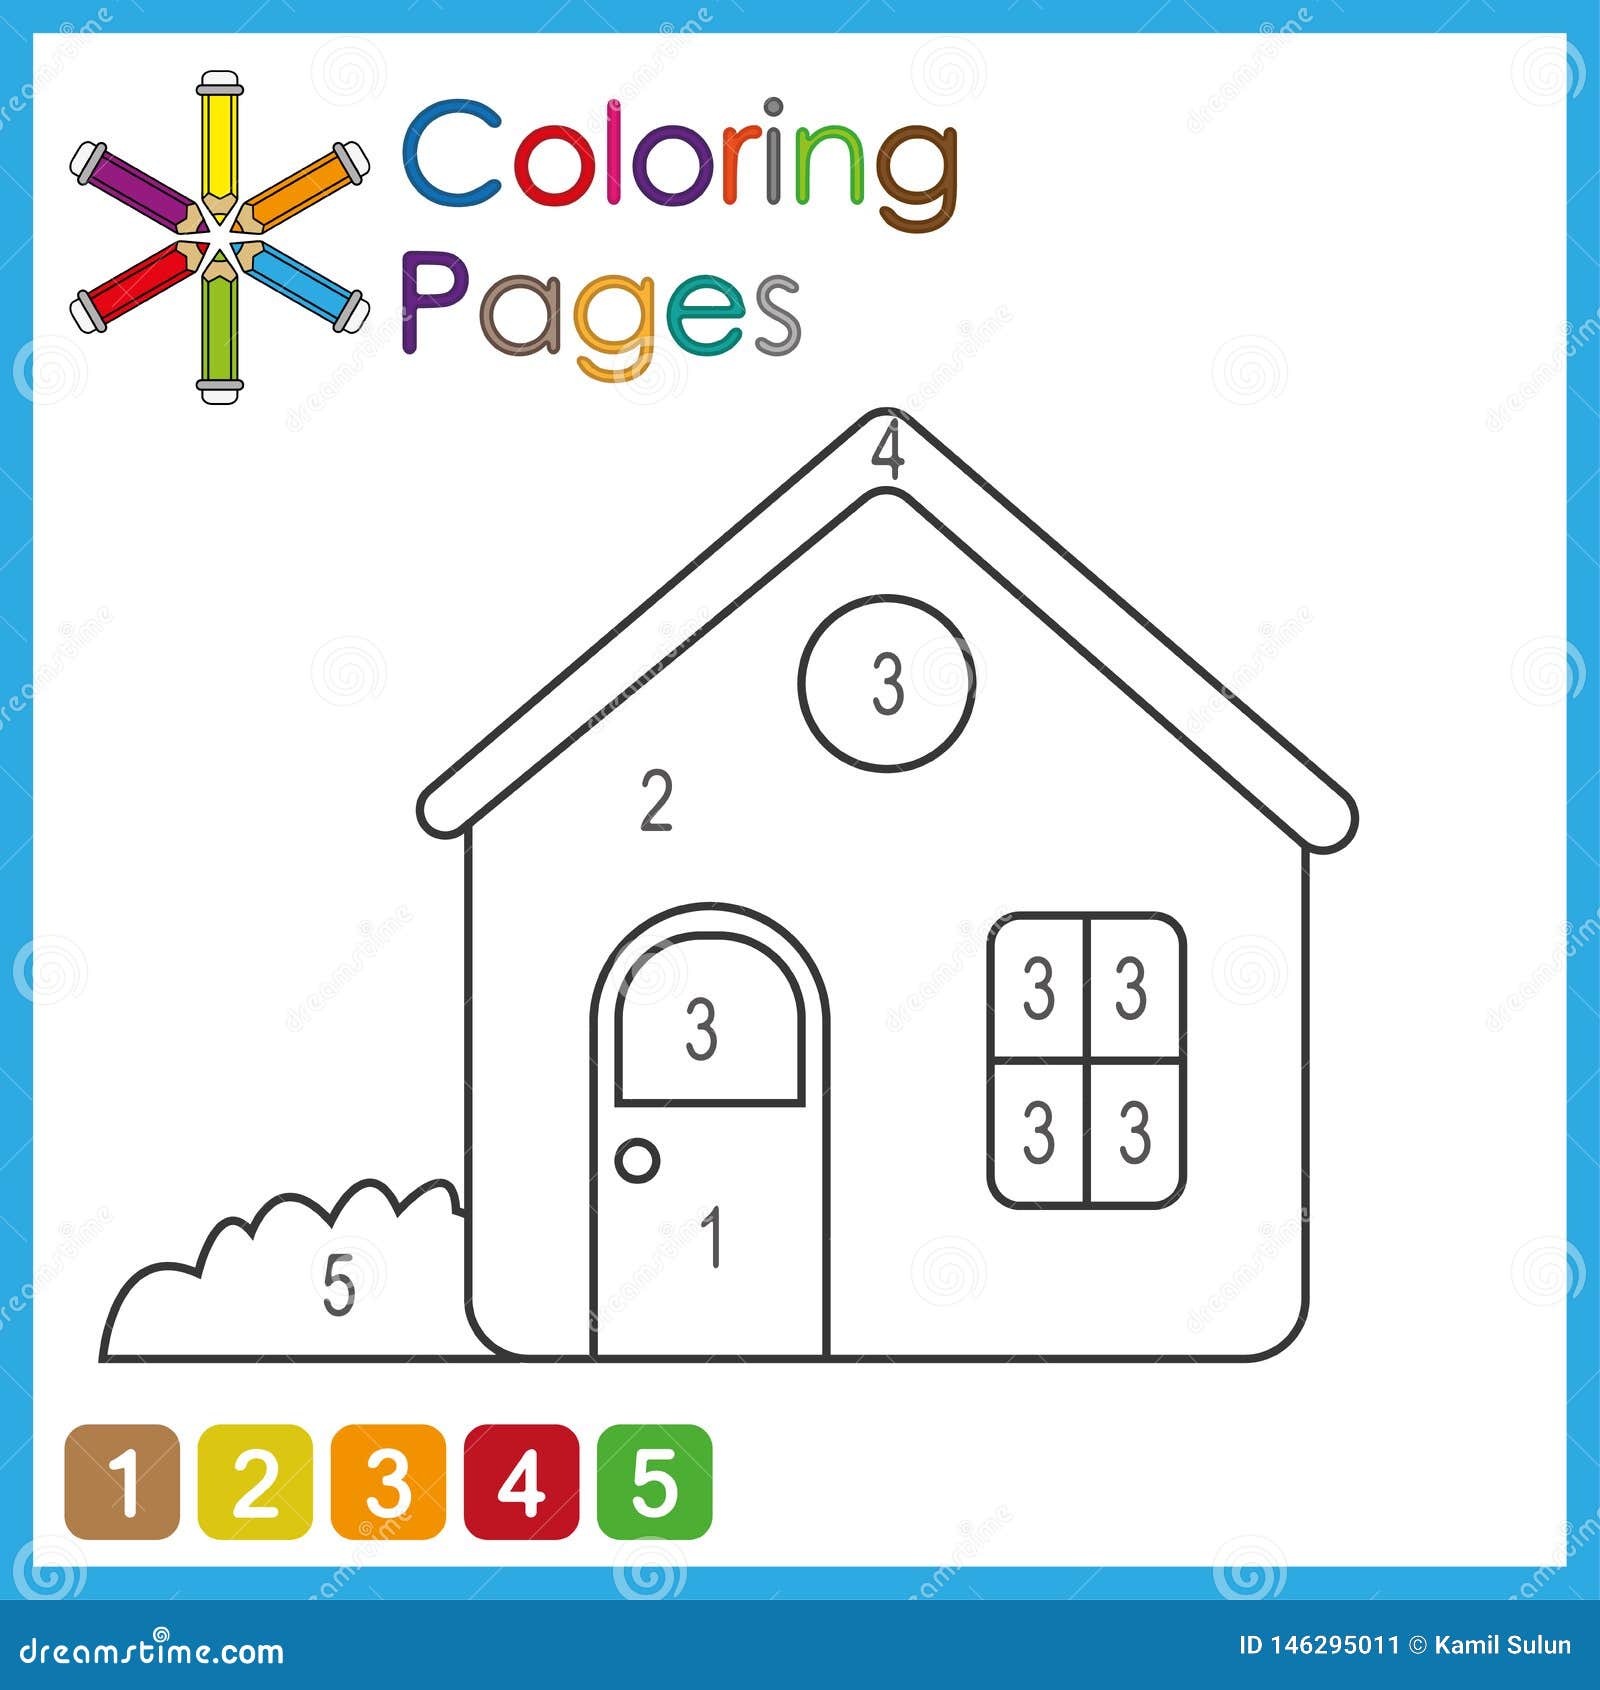 Coloring Page for Kids, Color the Parts of the Object According To Numbers,  Color by Numbers Stock Illustration - Illustration of kids, colouring:  146295011